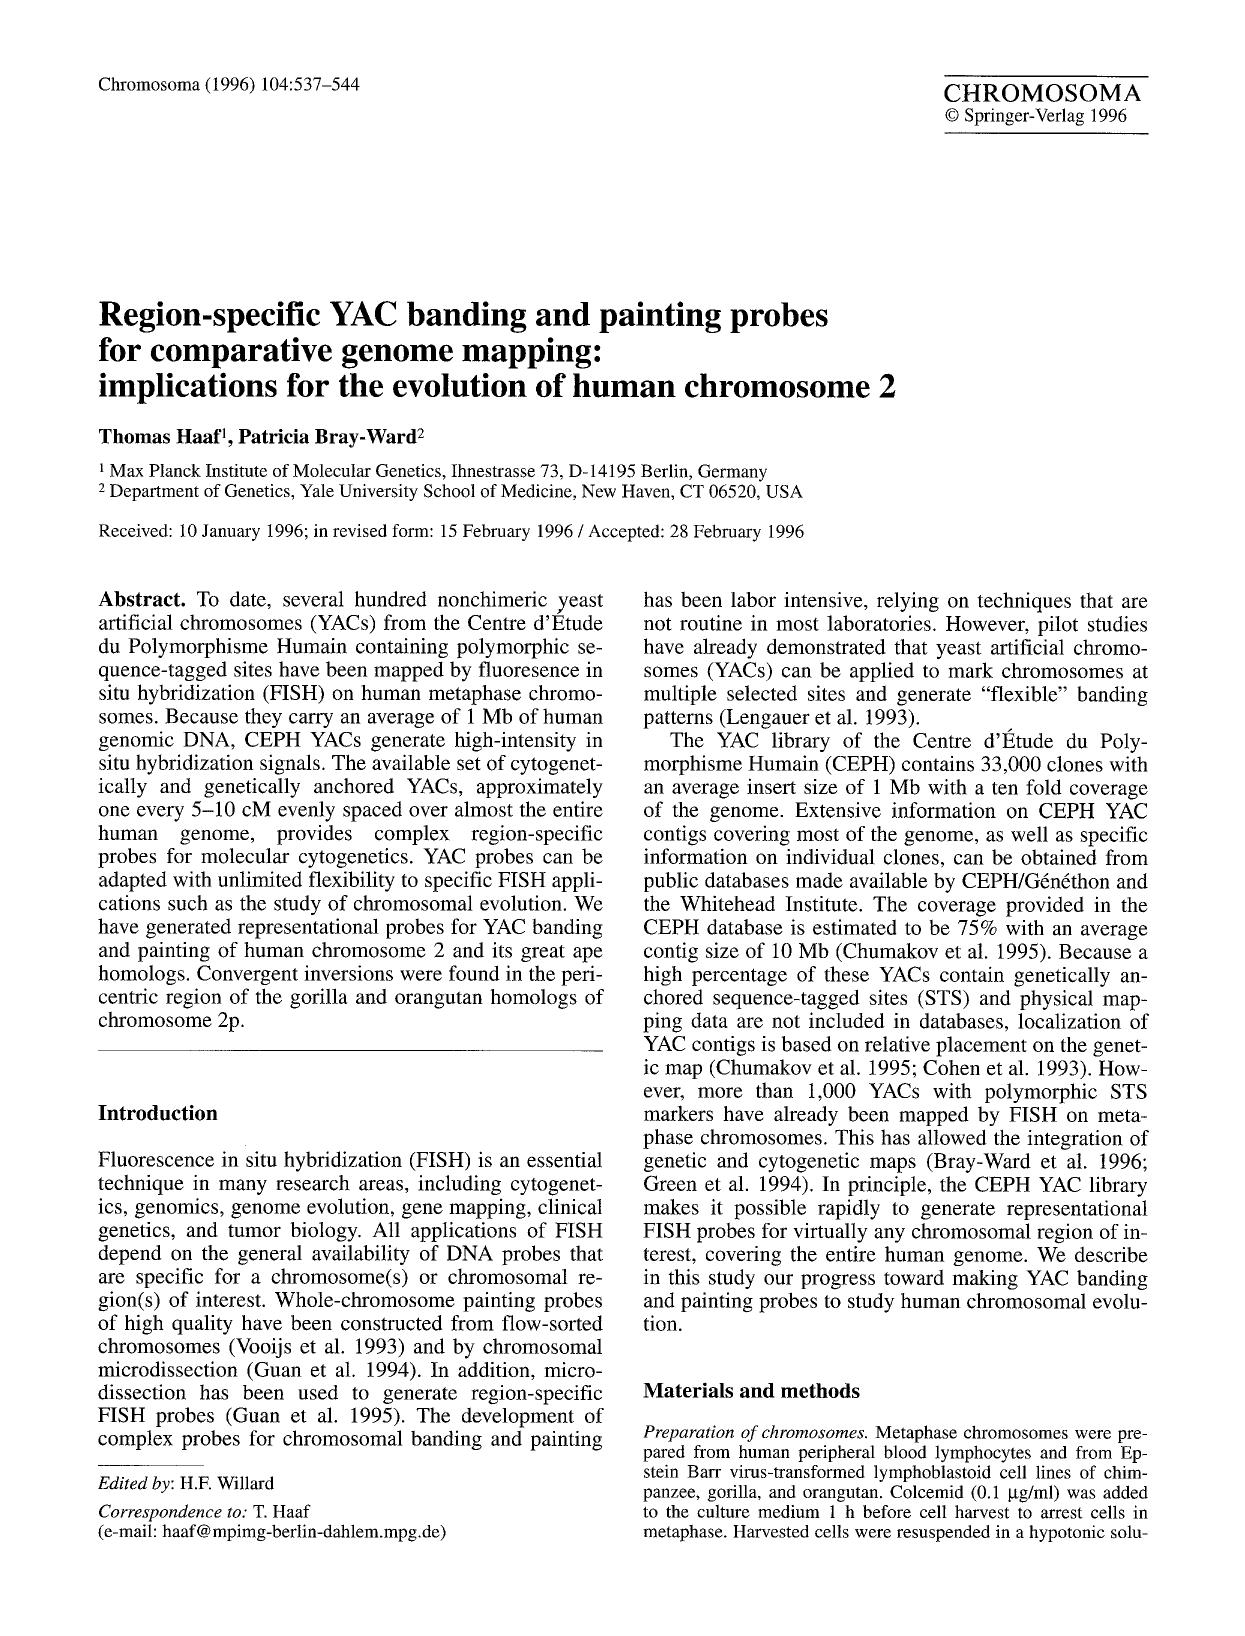 Region-specific YAC banding and painting probes for comparative genome mapping: implications for the evolution of human chromosome 2 by Unknown